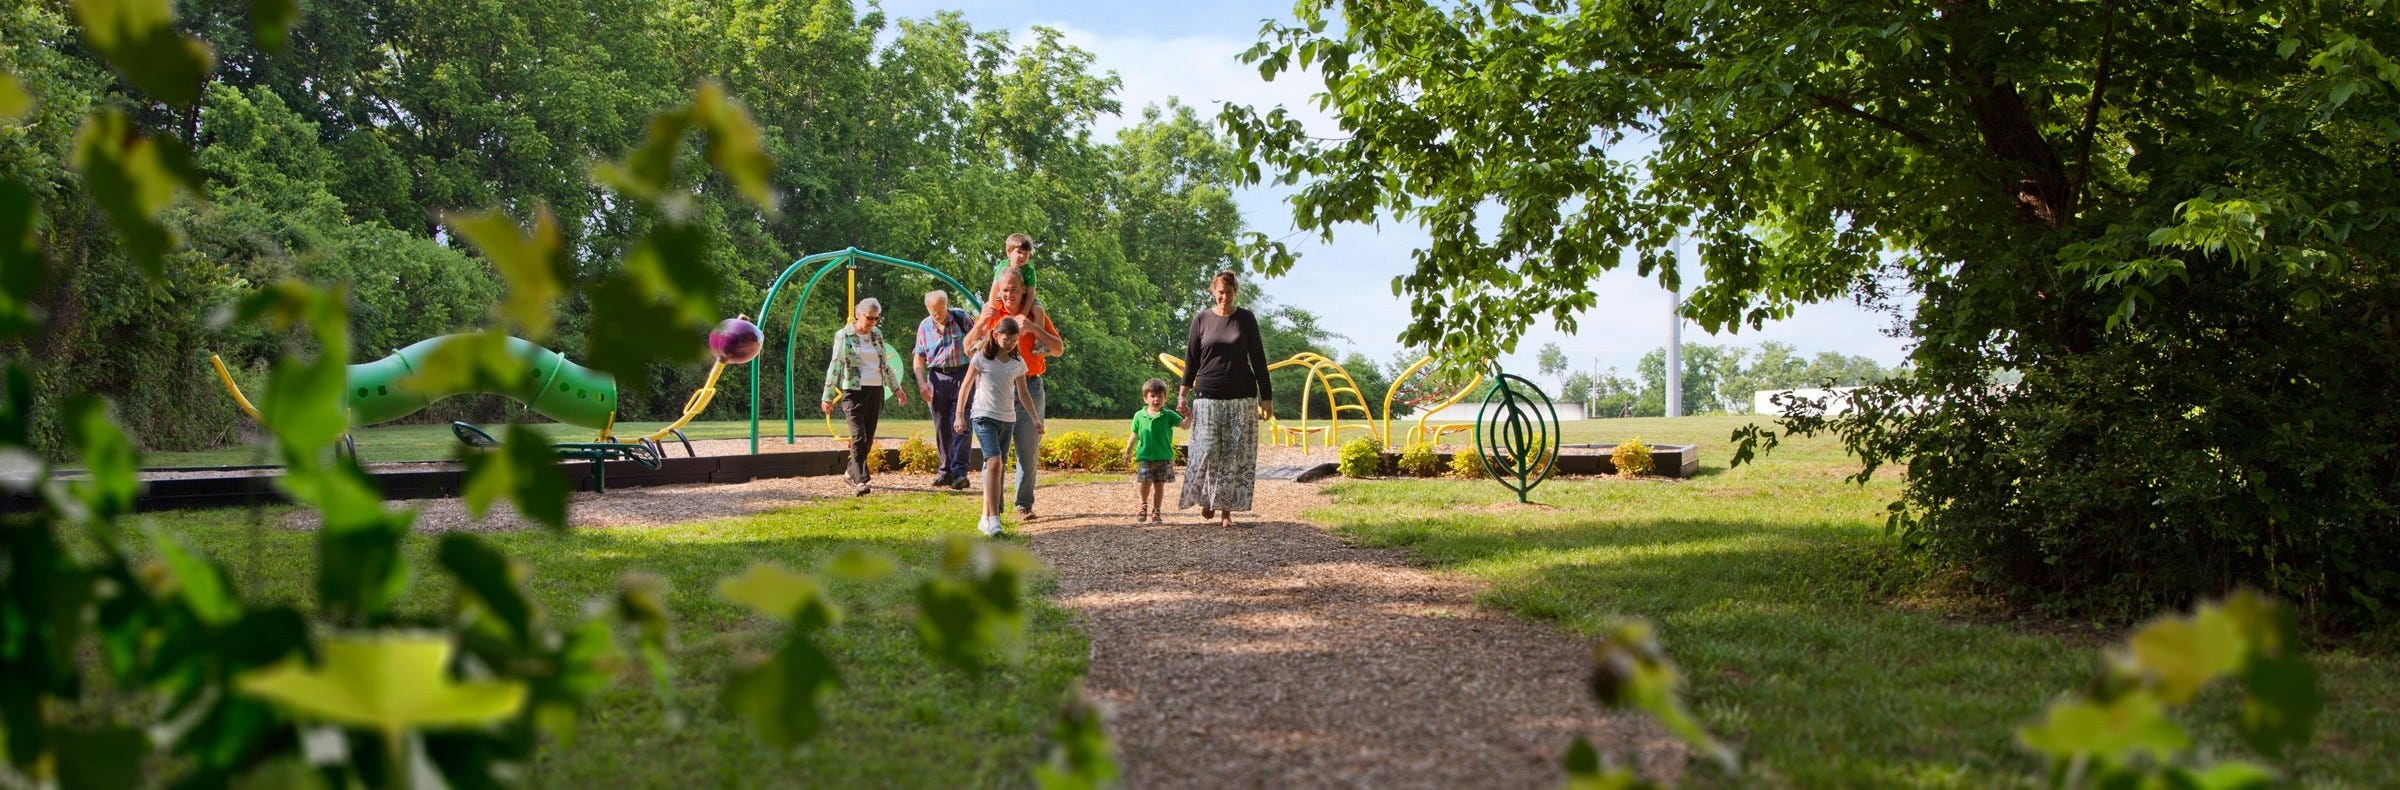 Playful Pathways - 5 Benefits of Trail-Based Play for Children